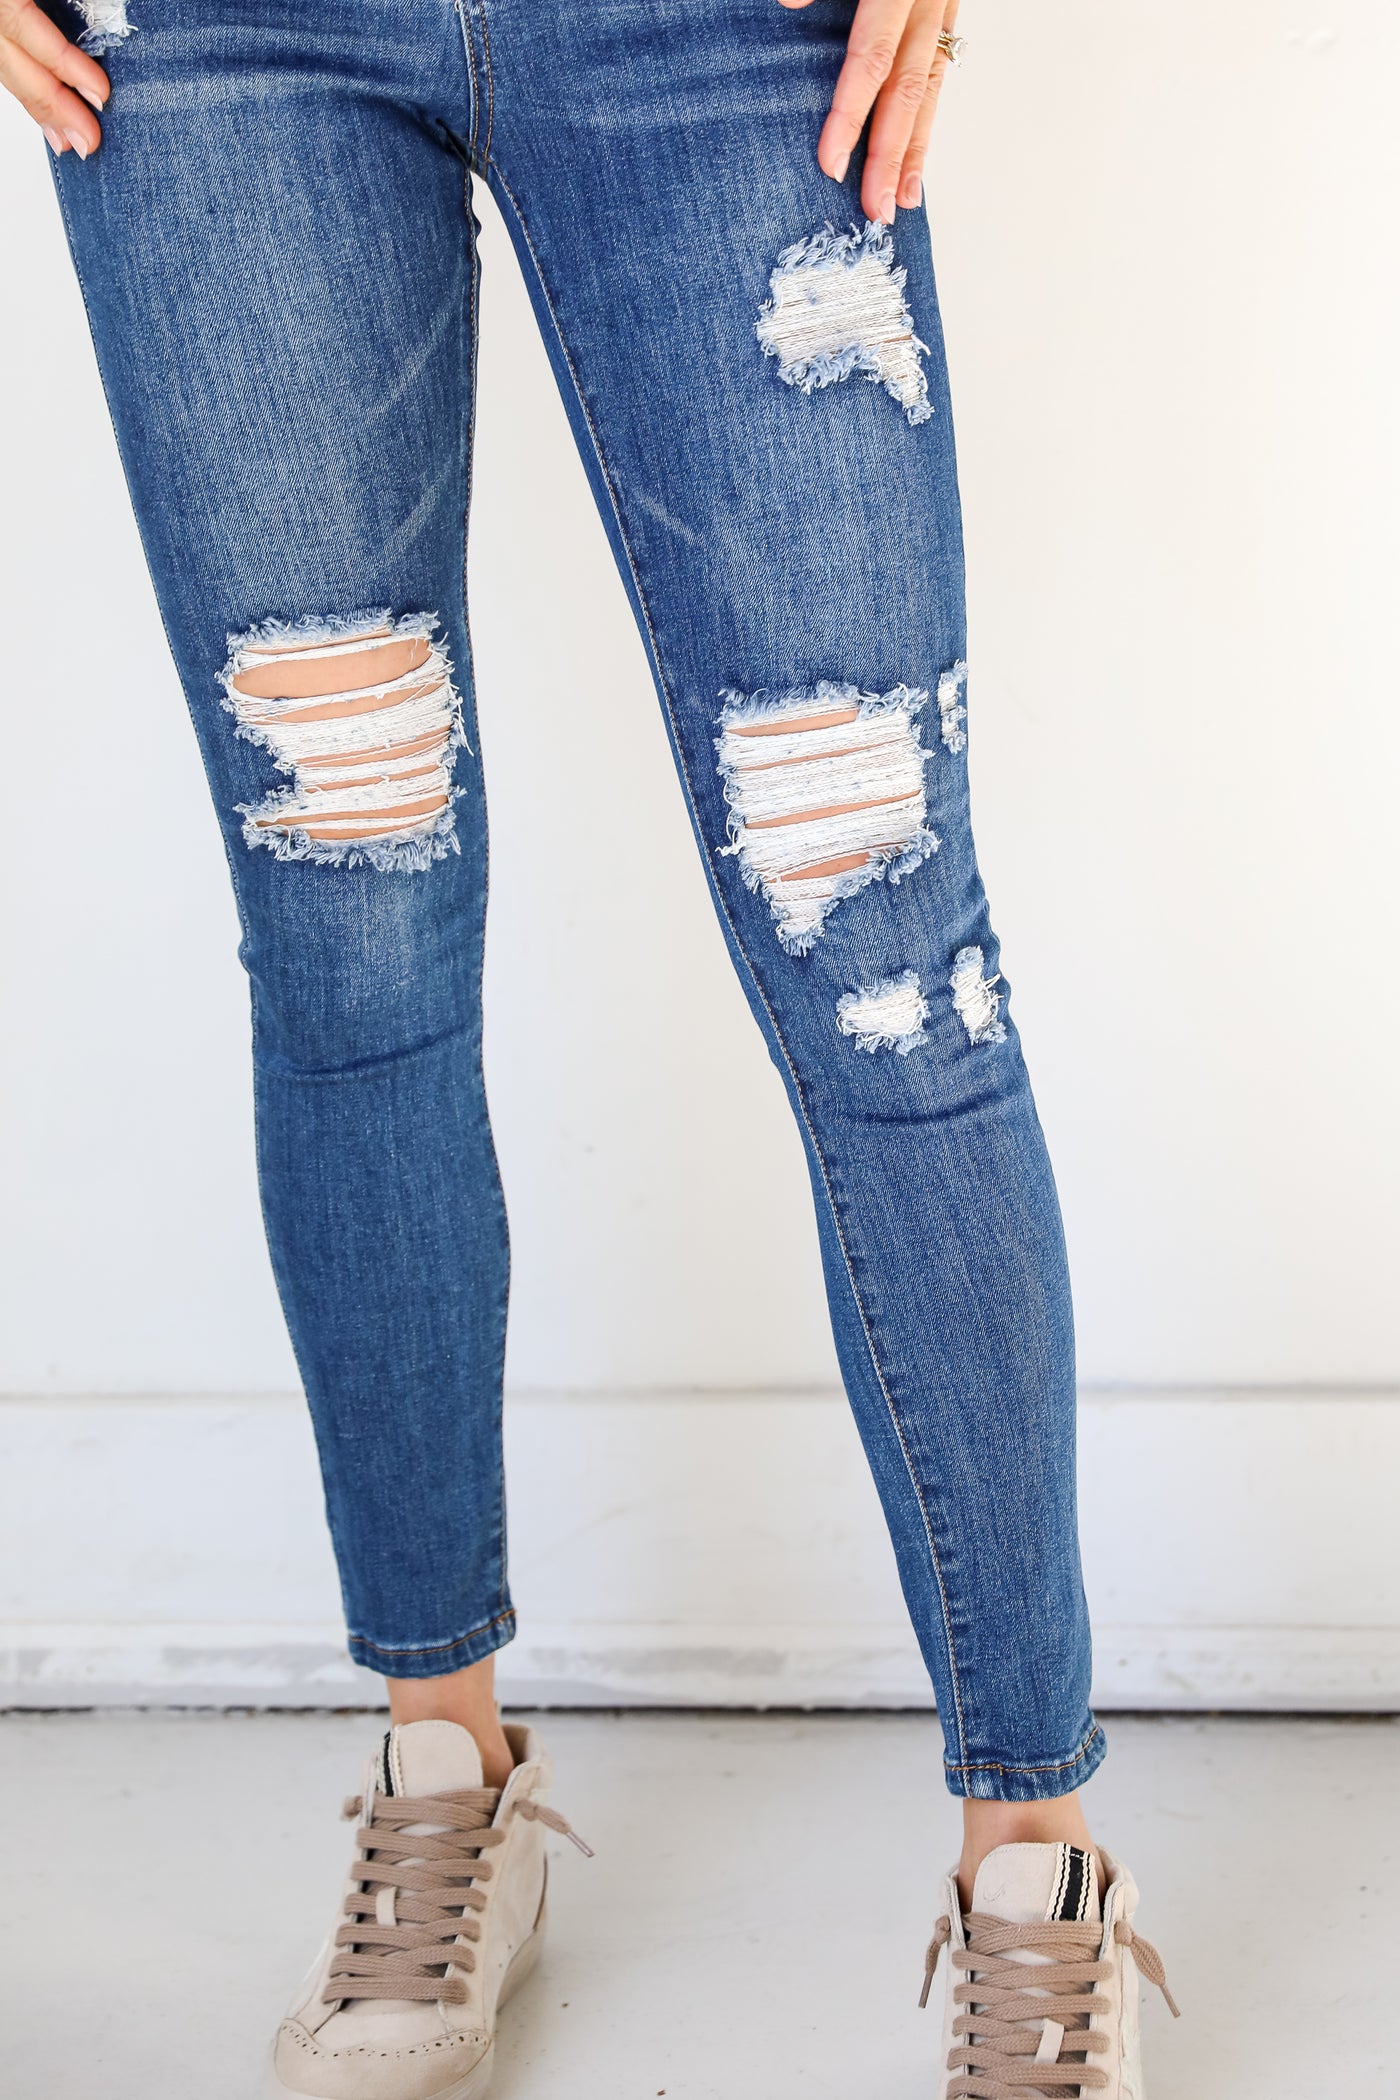 Distressed Skinny Jeans close up view